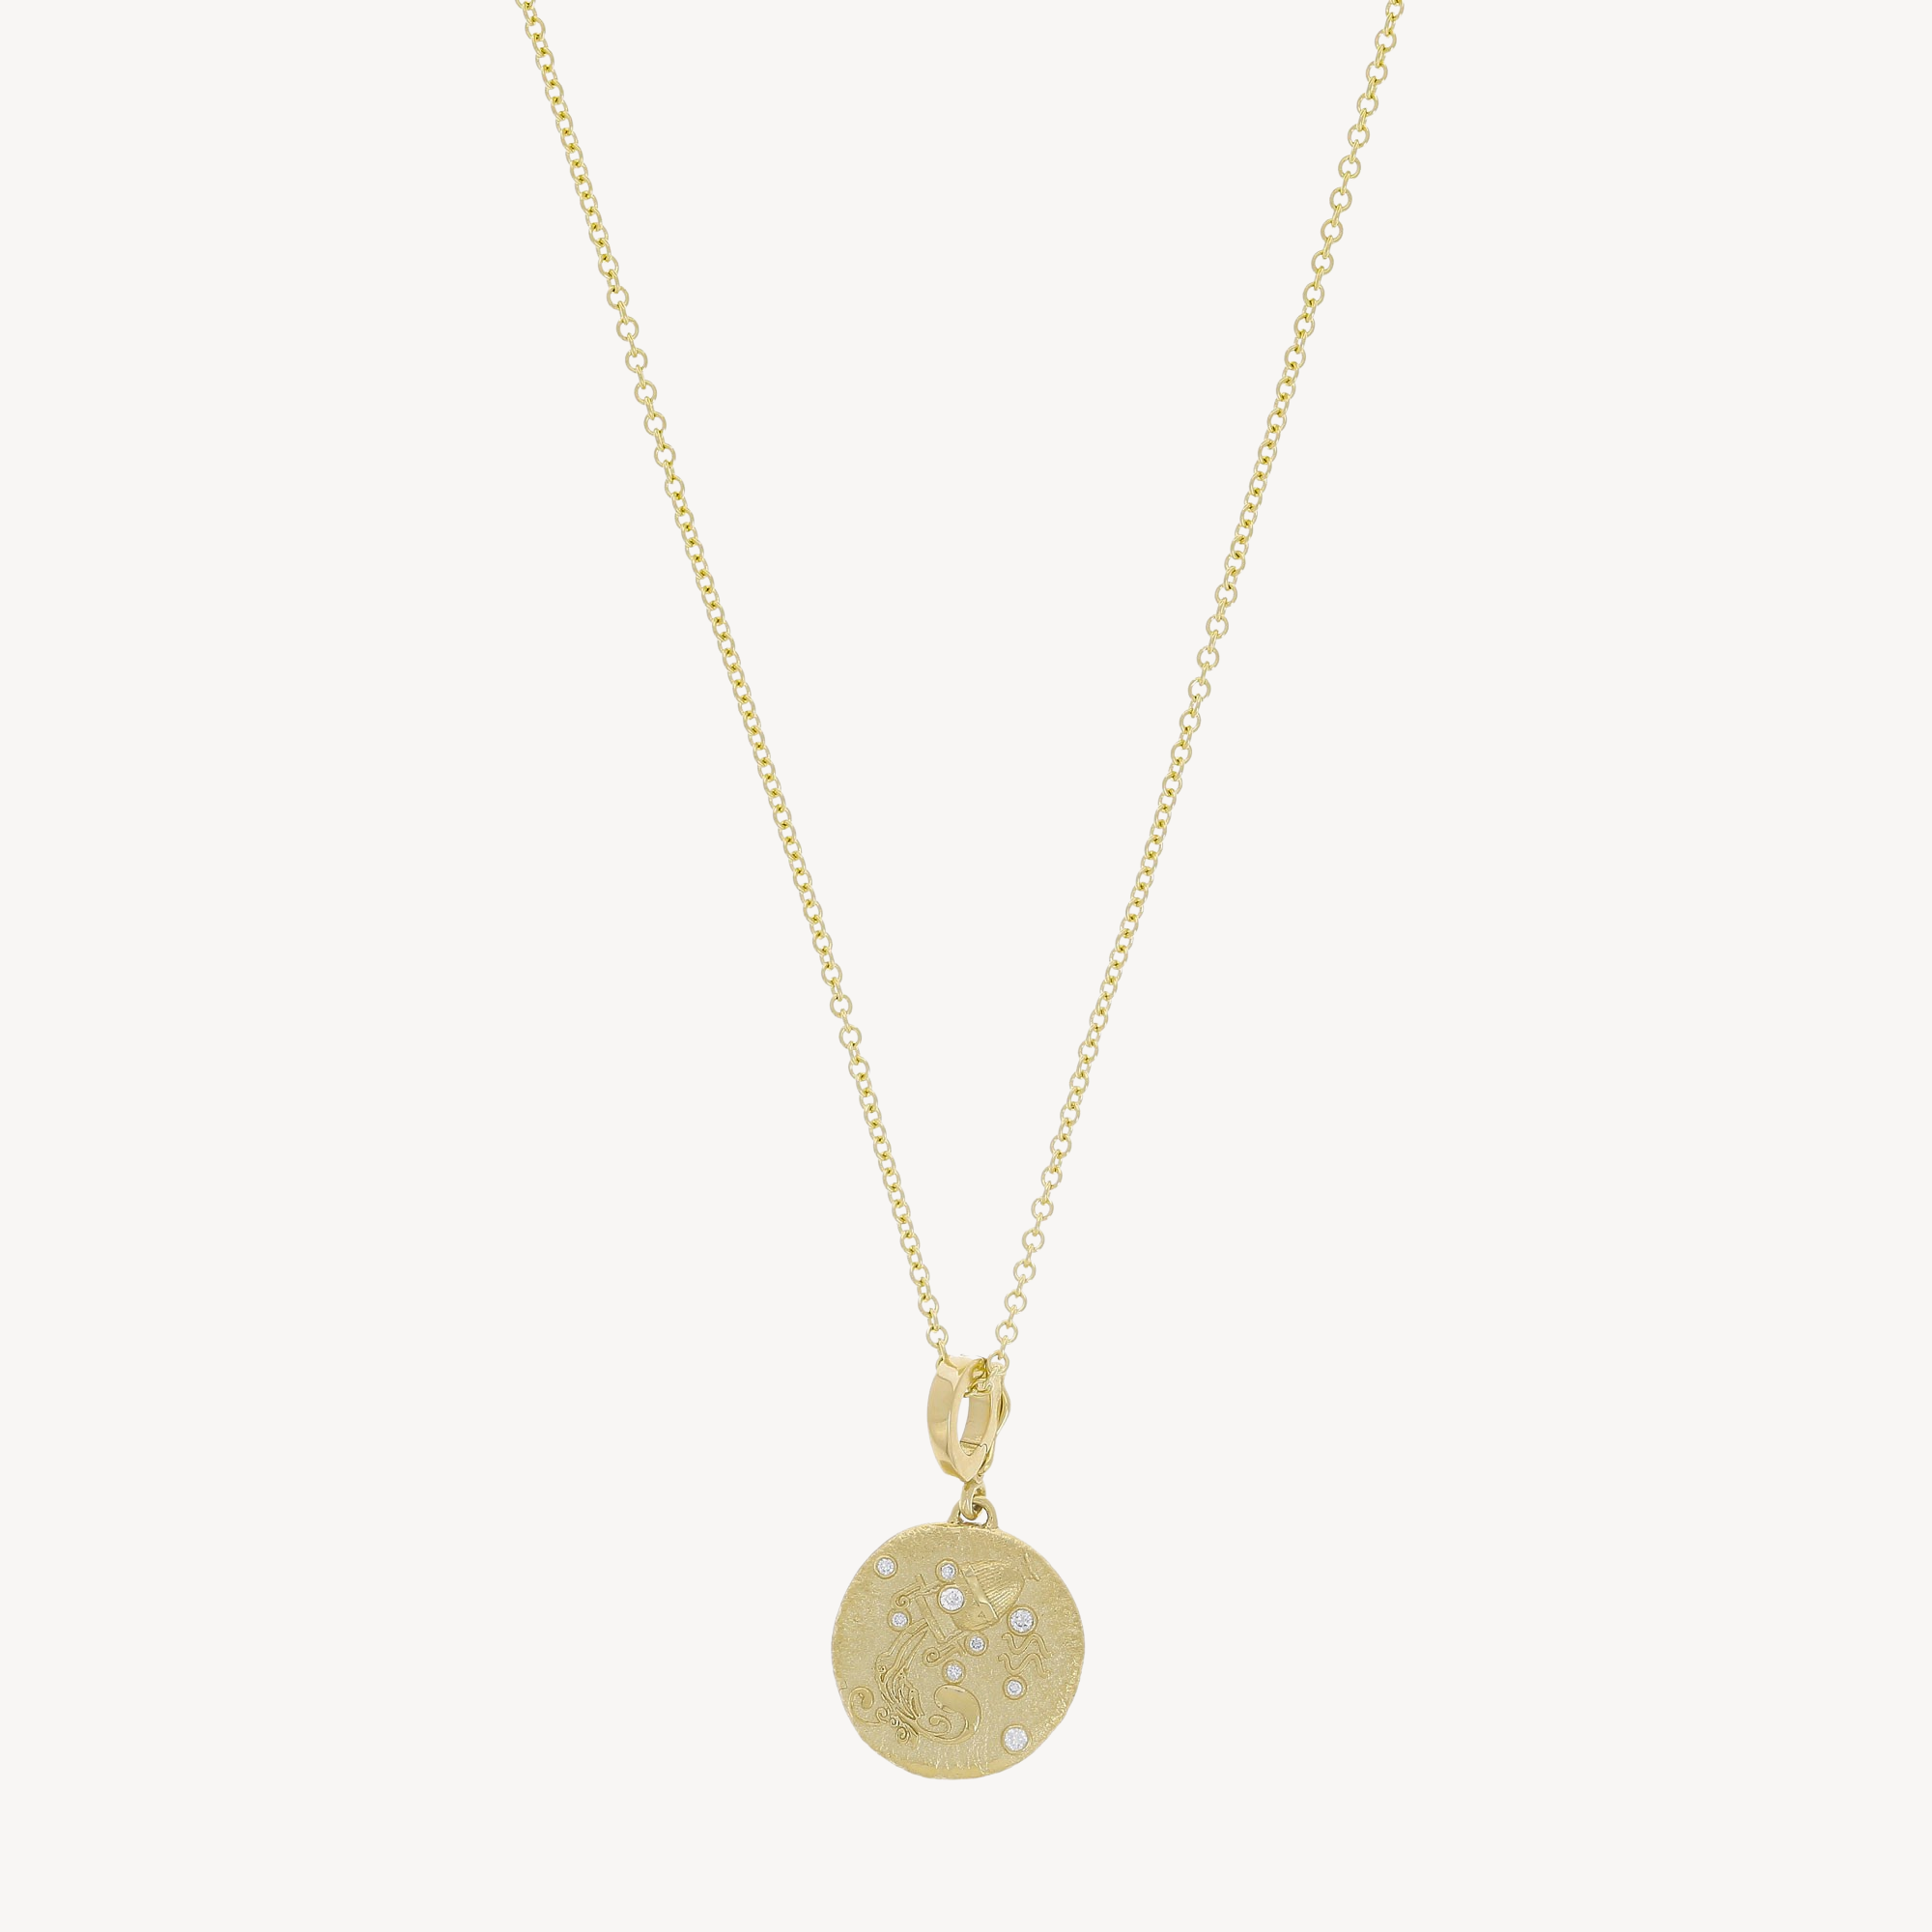 Of The Stars Aquarius Small Coin Necklace